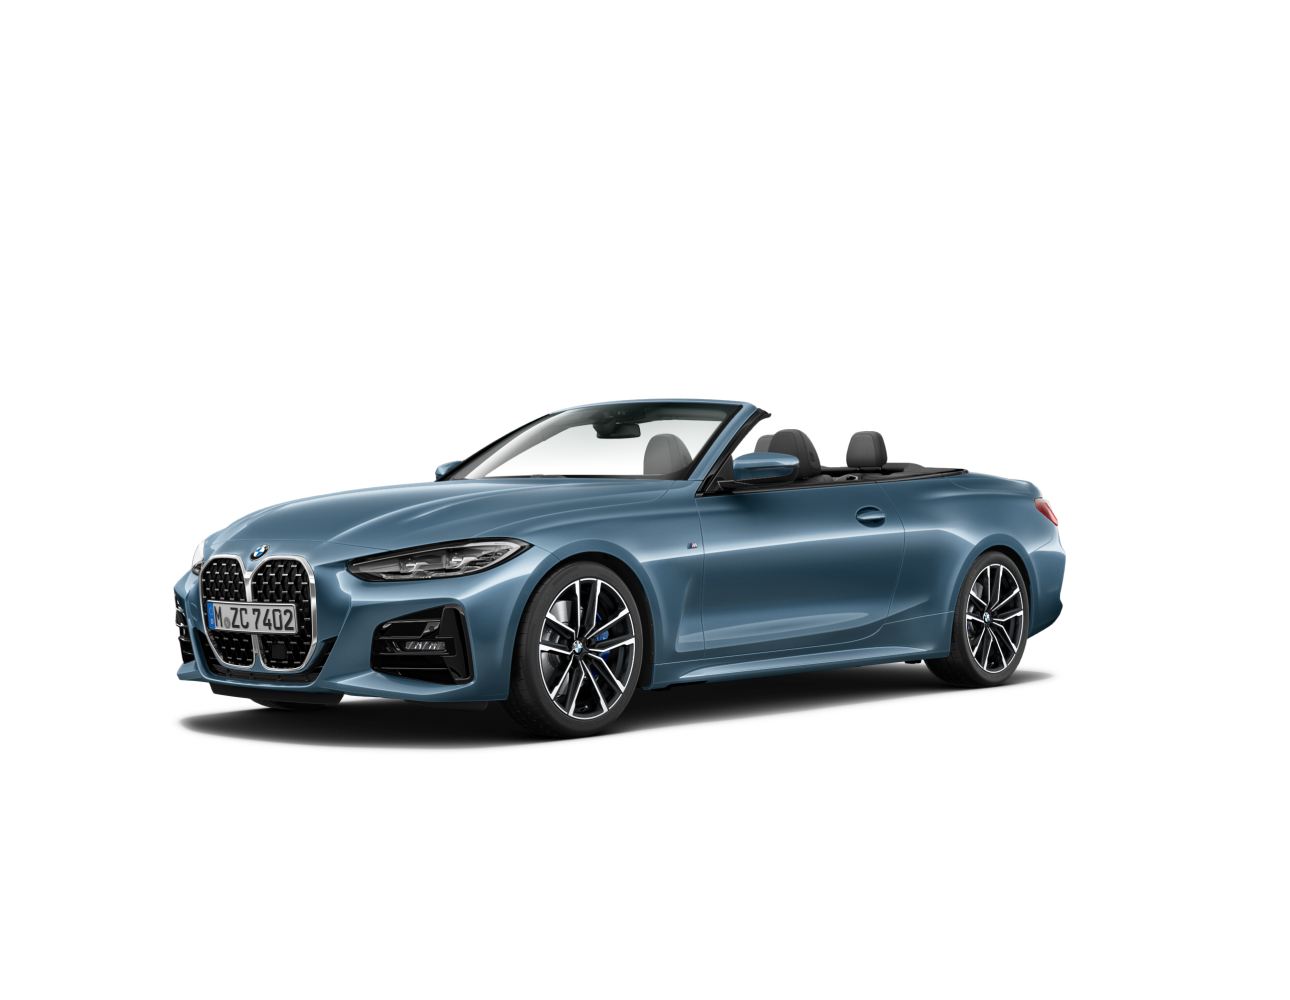 Bmw 4 series convertible 430i convertible m sport edition front side